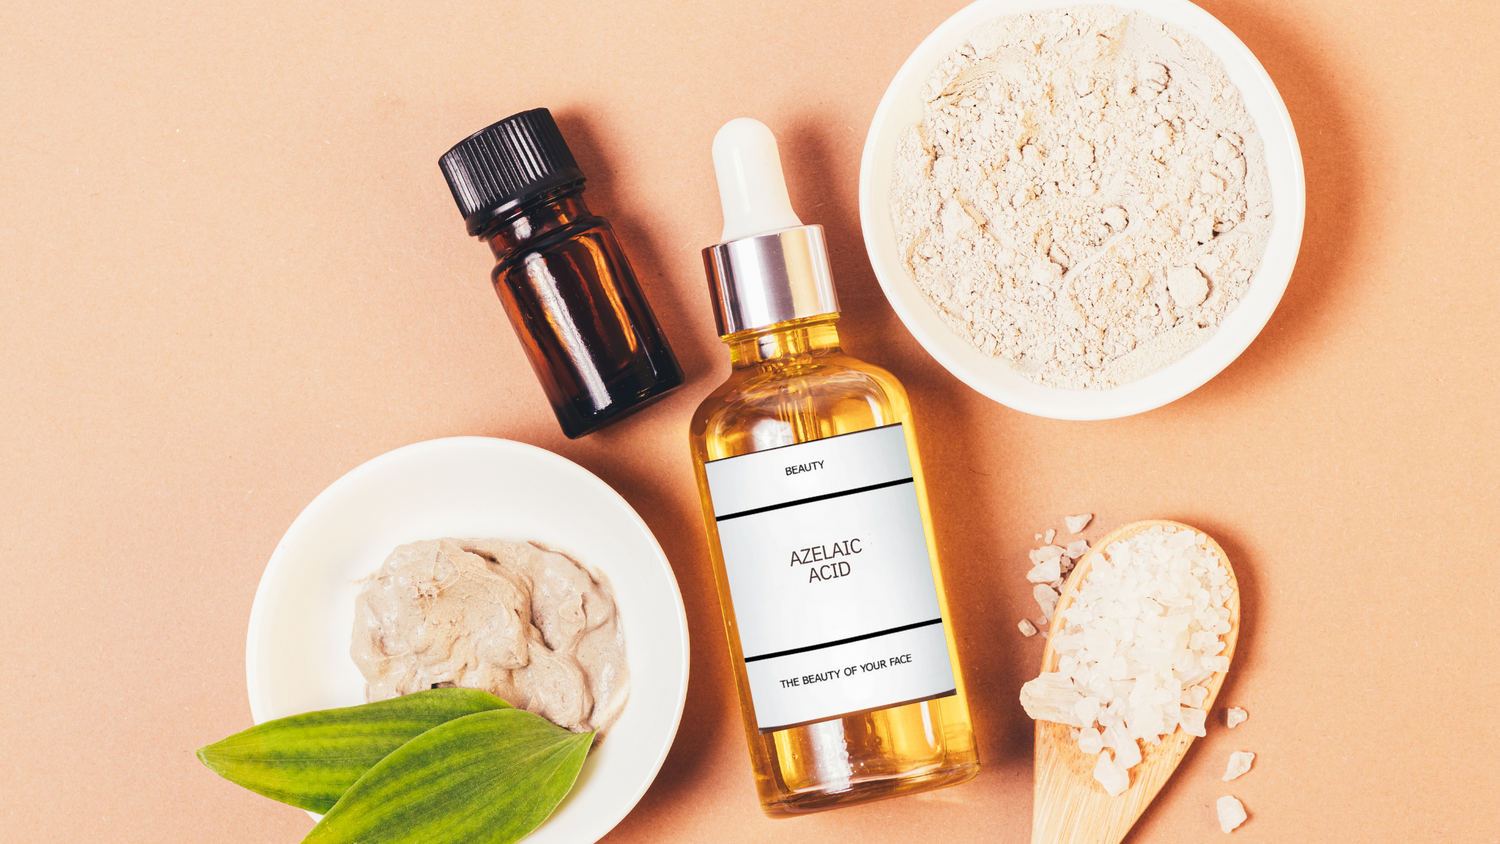 Azelaic acid in liquid, powder, and cream form to be used in skincare